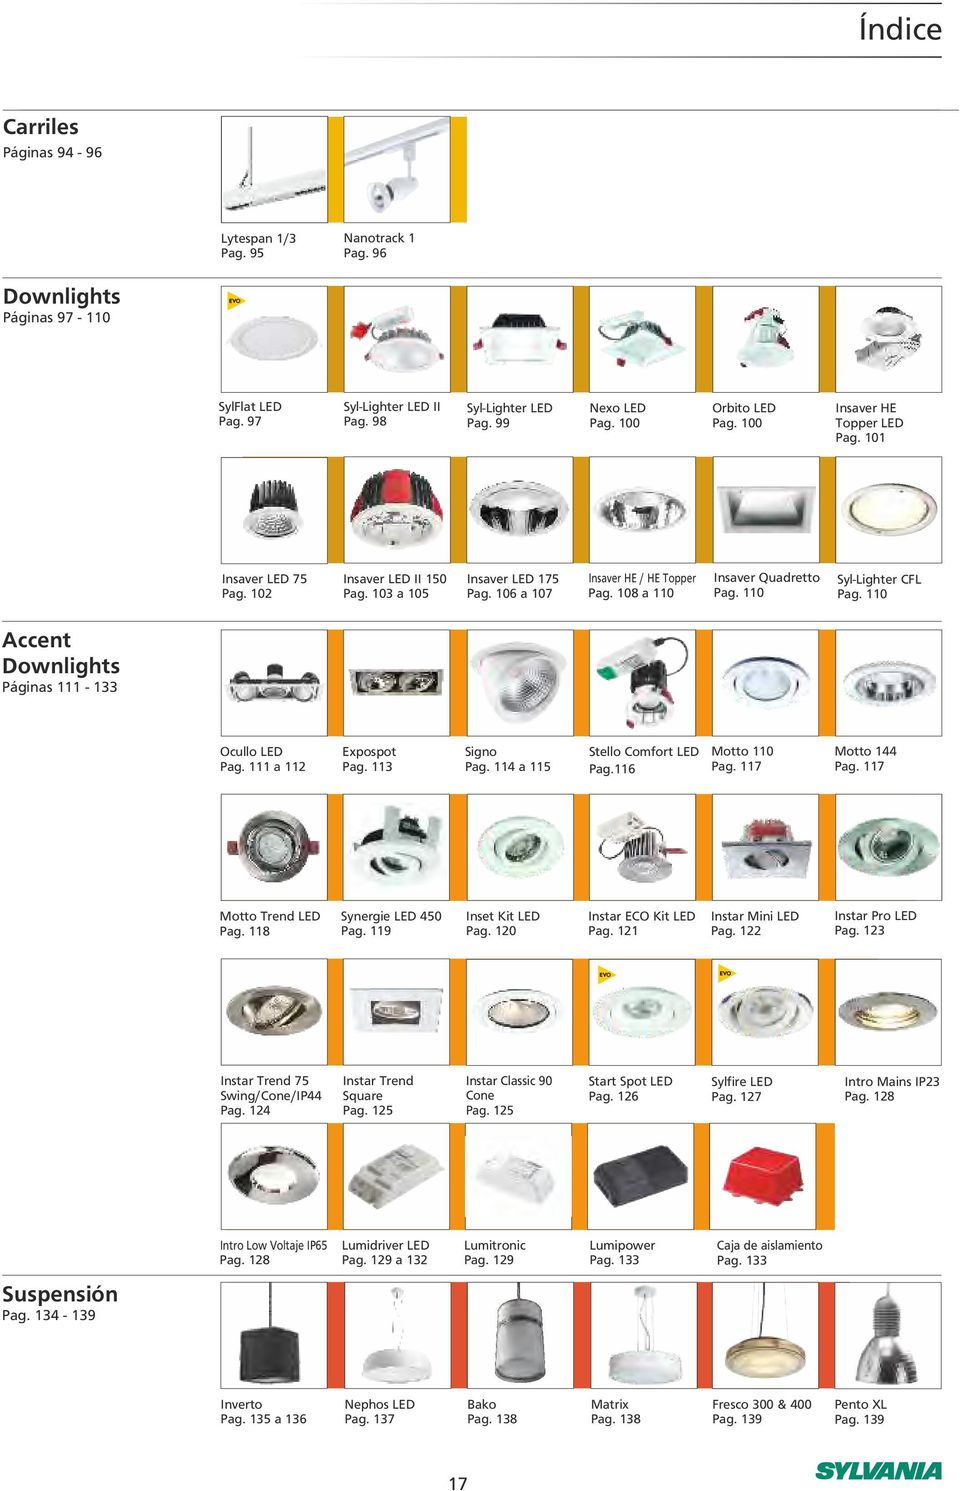 108 a 110 Insaver Quadretto Pag. 110 Syl-Lighter CFL Pag. 110 Accent Downlights Páginas 111-133 Ocullo LED Pag. 111 a 112 Expospot Pag. 113 Signo Pag. 114 a 115 Stello Comfort LED Pag.